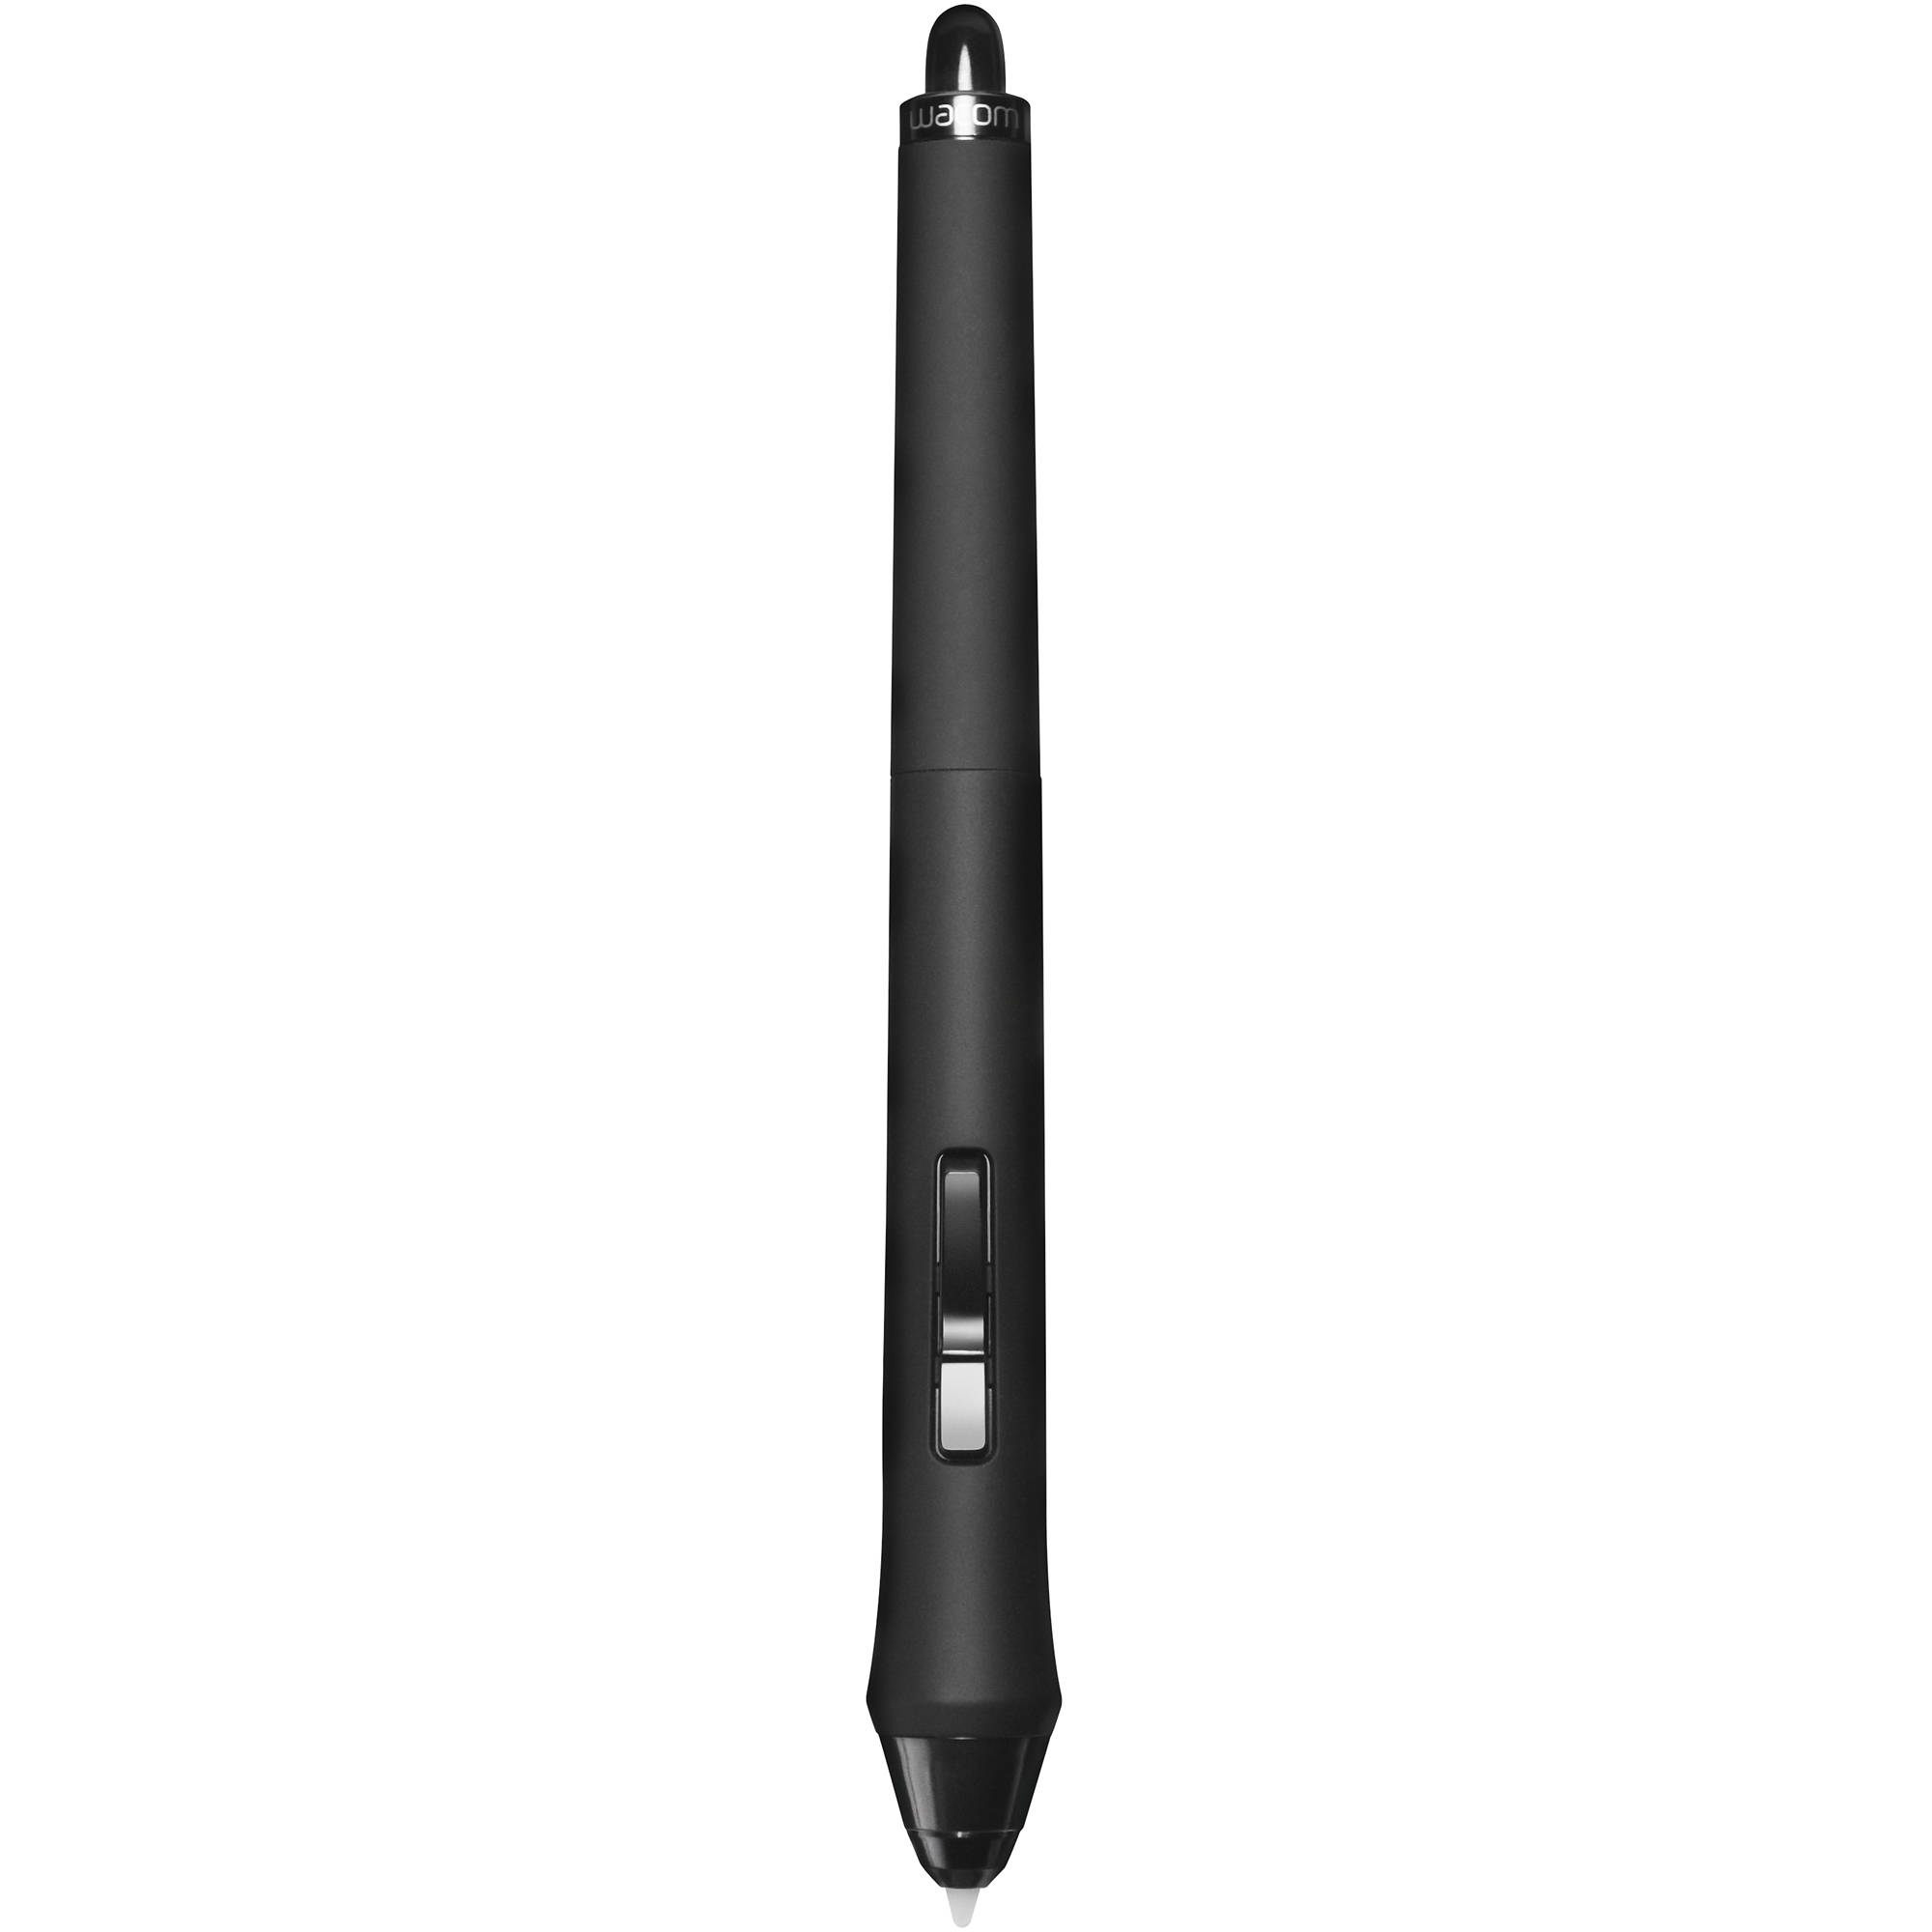 Wacom Pen Png - Wacom Art Pen W/ Stand And Replacement Nibs, Transparent background PNG HD thumbnail